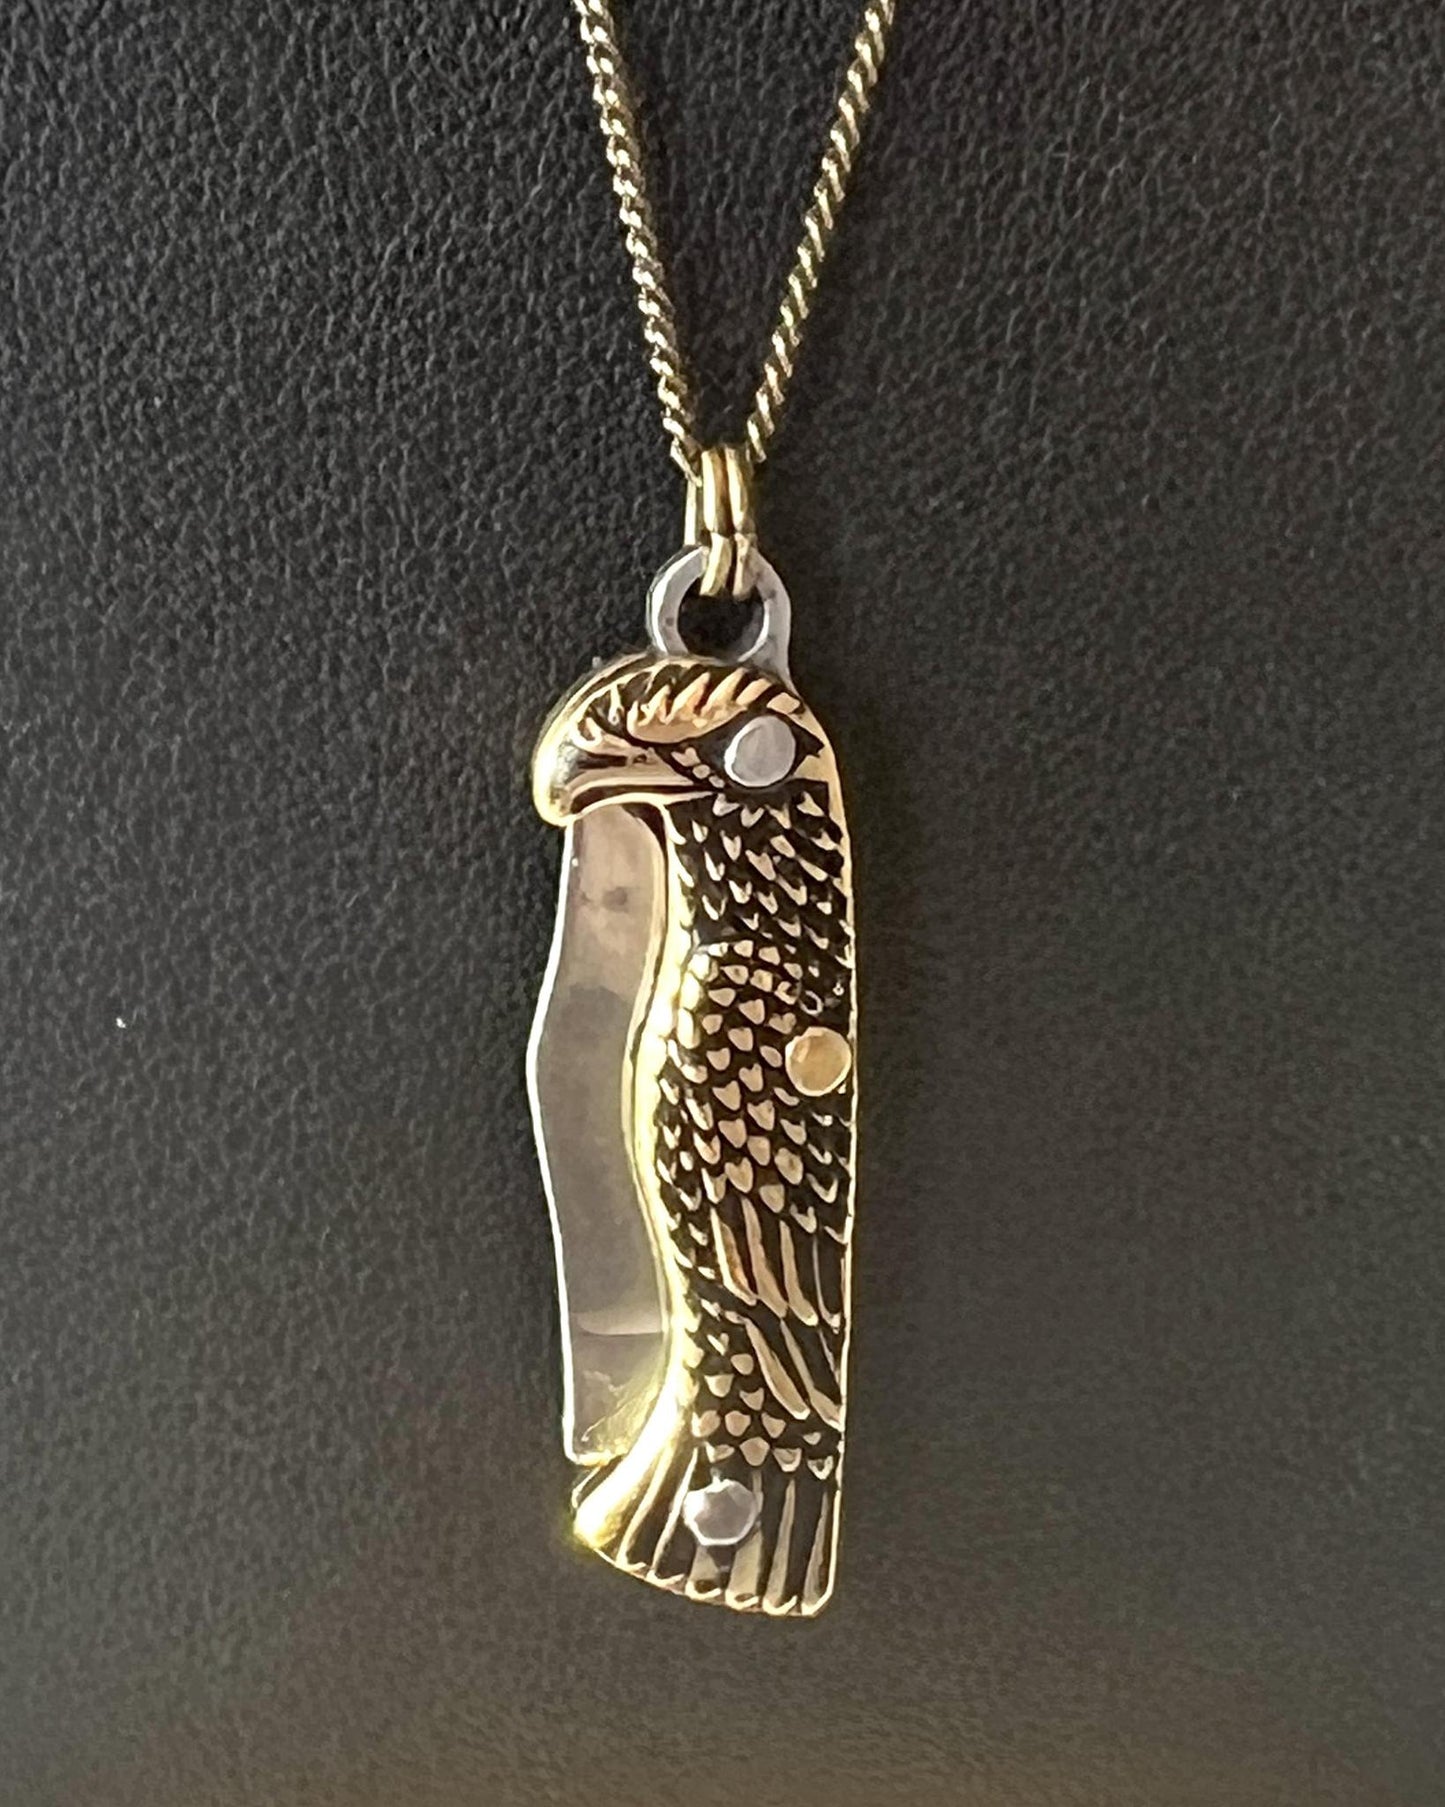 1979 Jewelry Knife Necklace 1.5 inch Eagle